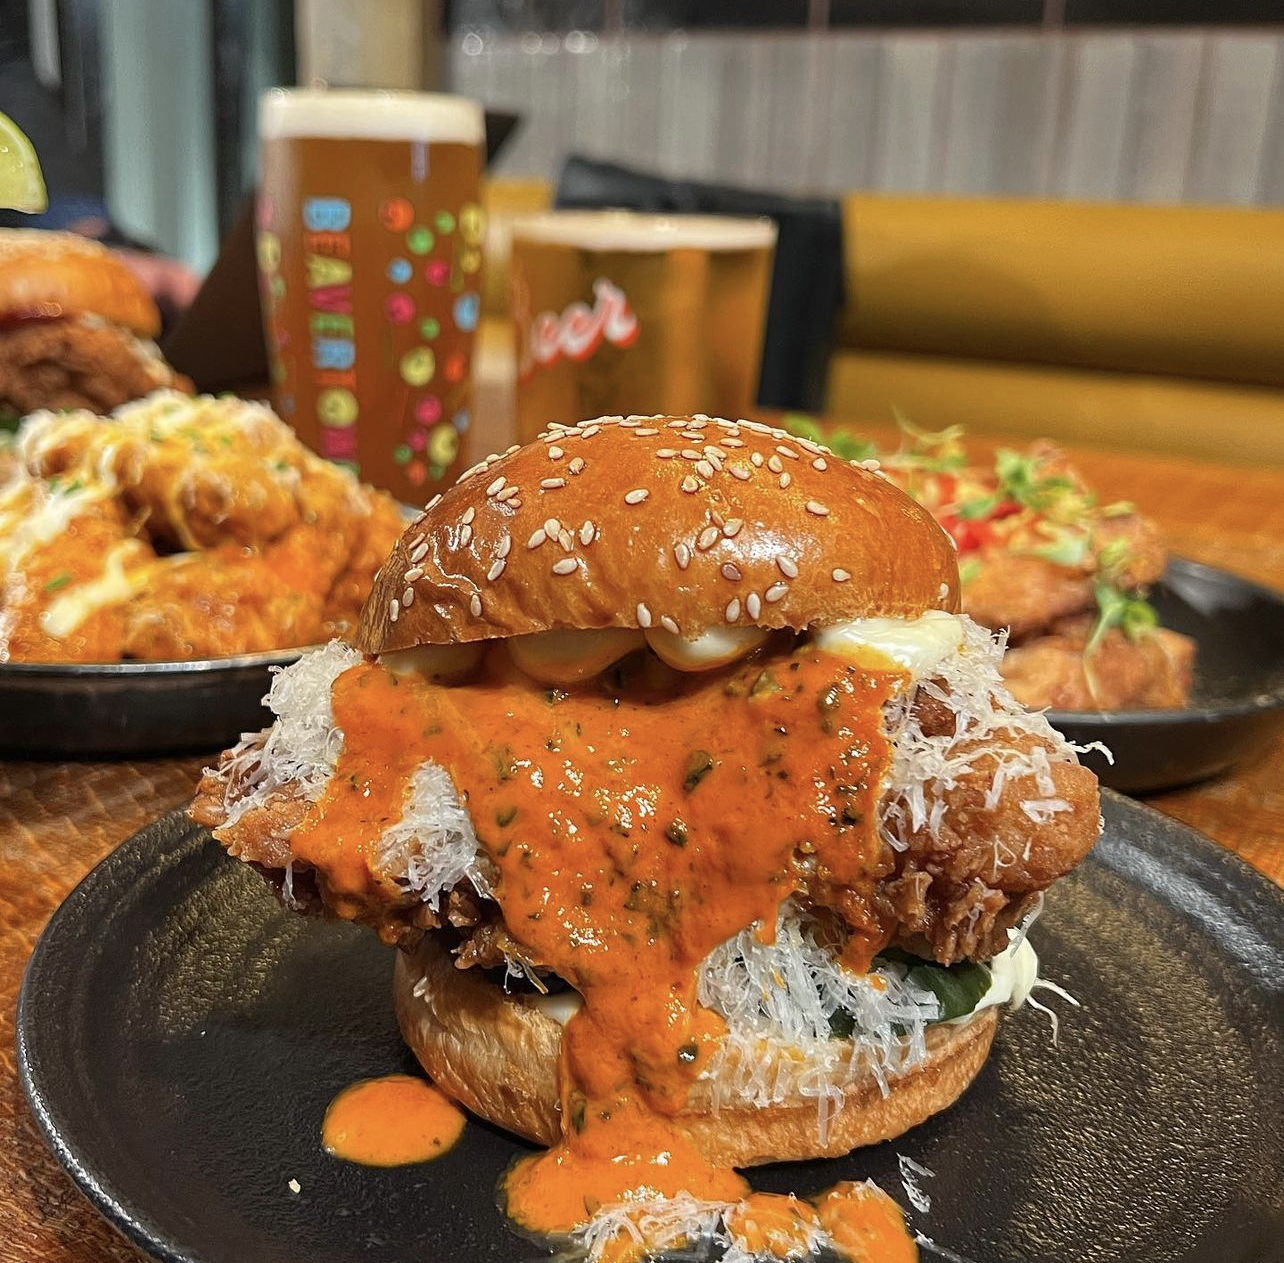 A late-night chicken sandwich with spicy sauce on a sesame bun, served with a beer and side dishes on a wooden table.